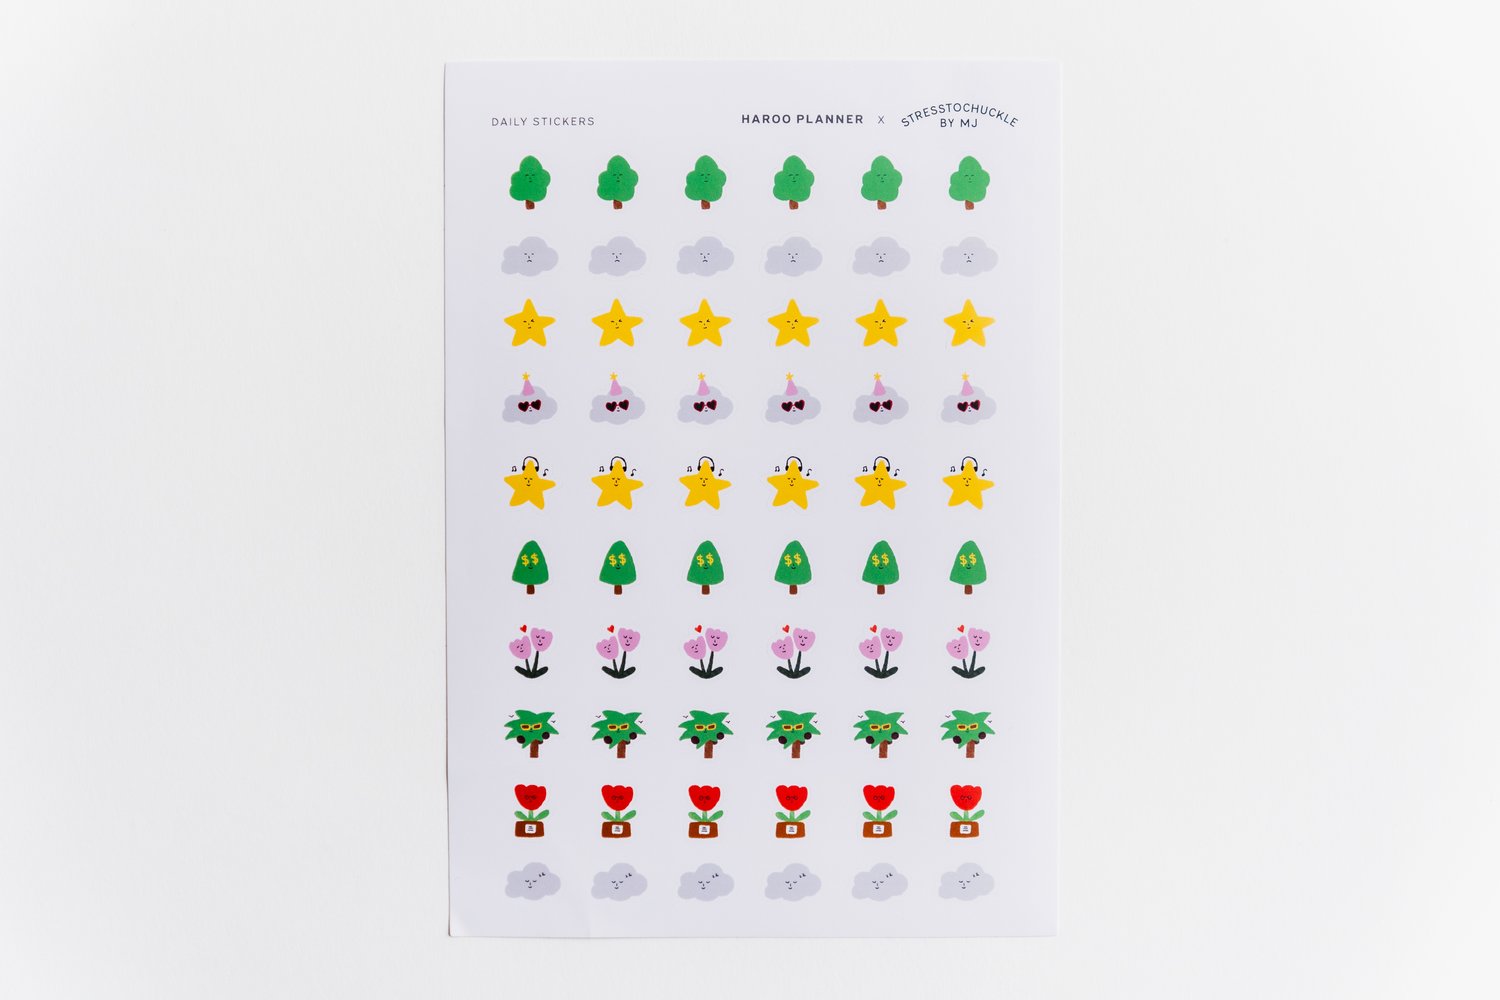 Daily & Holiday Planner Sticker Set (stresstochuckle x Haroo